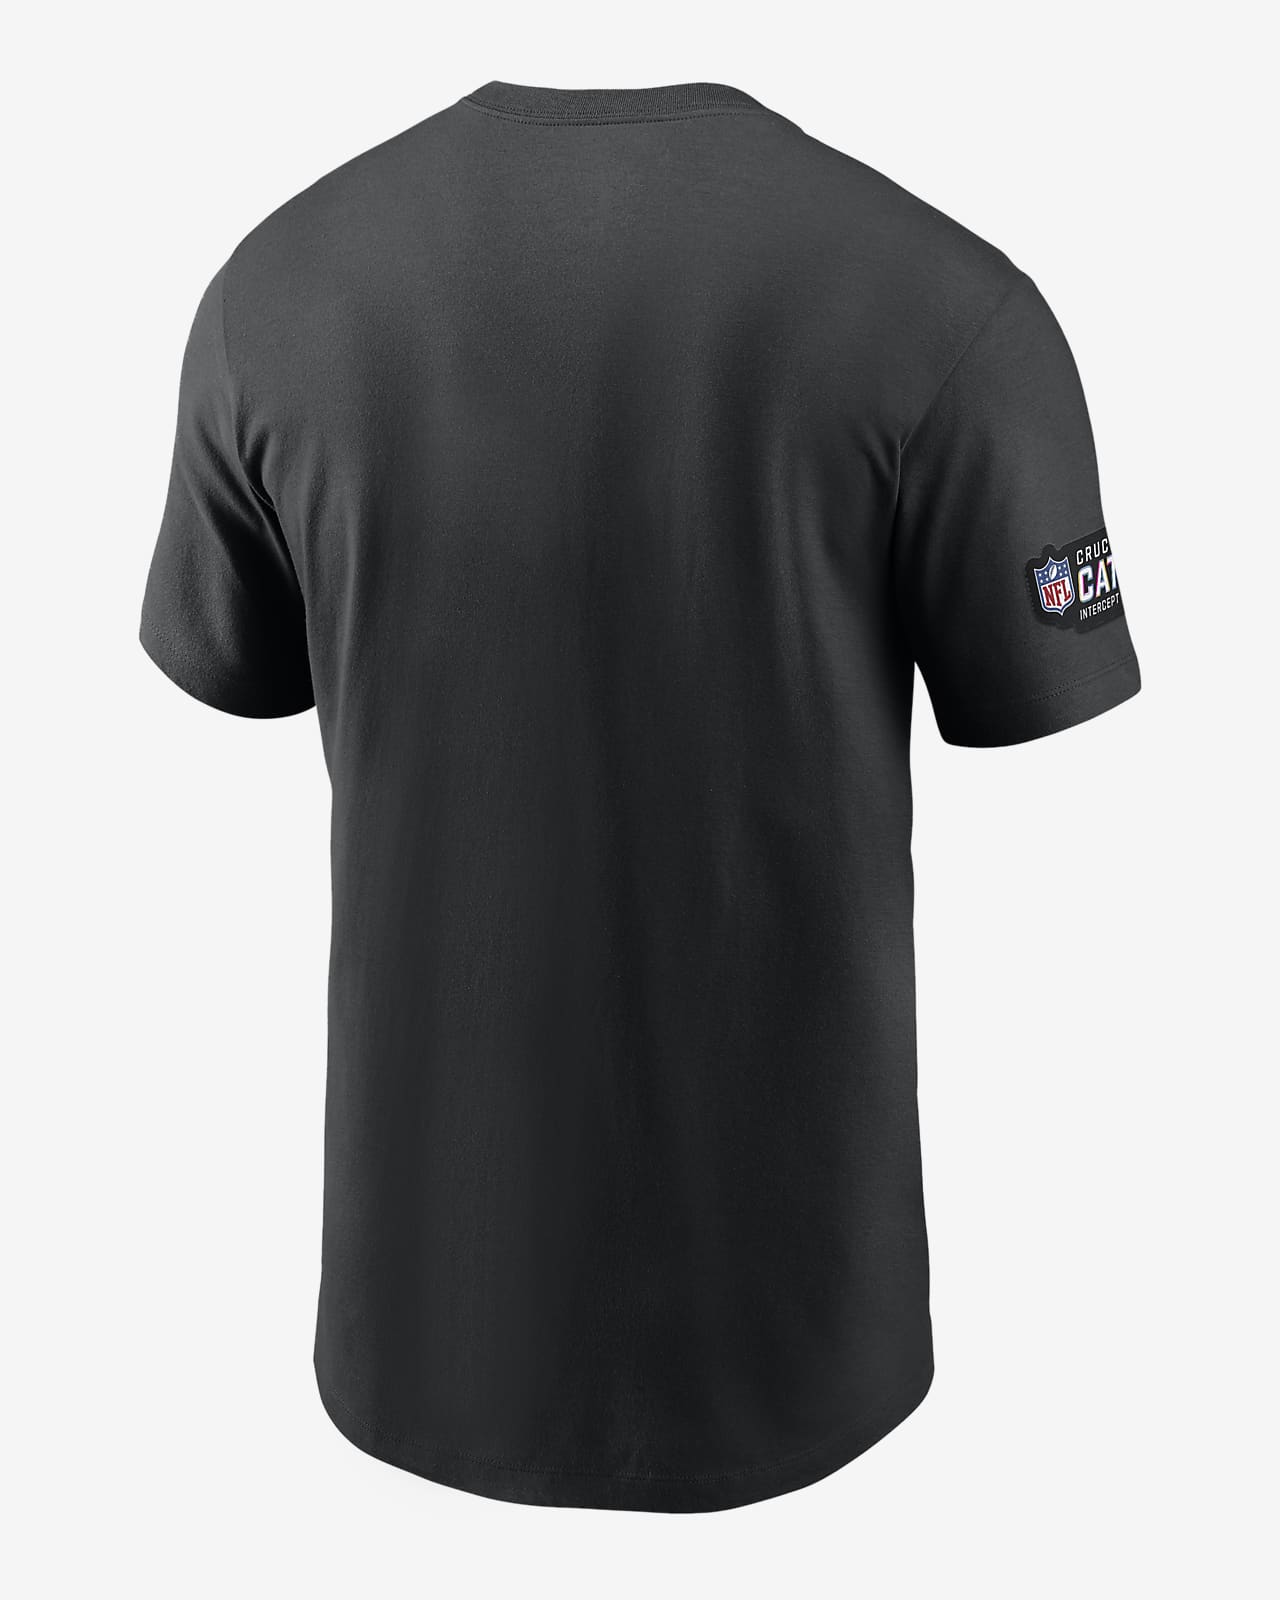 Miami Dolphins Crucial Catch Sideline Men's Nike NFL T-Shirt.